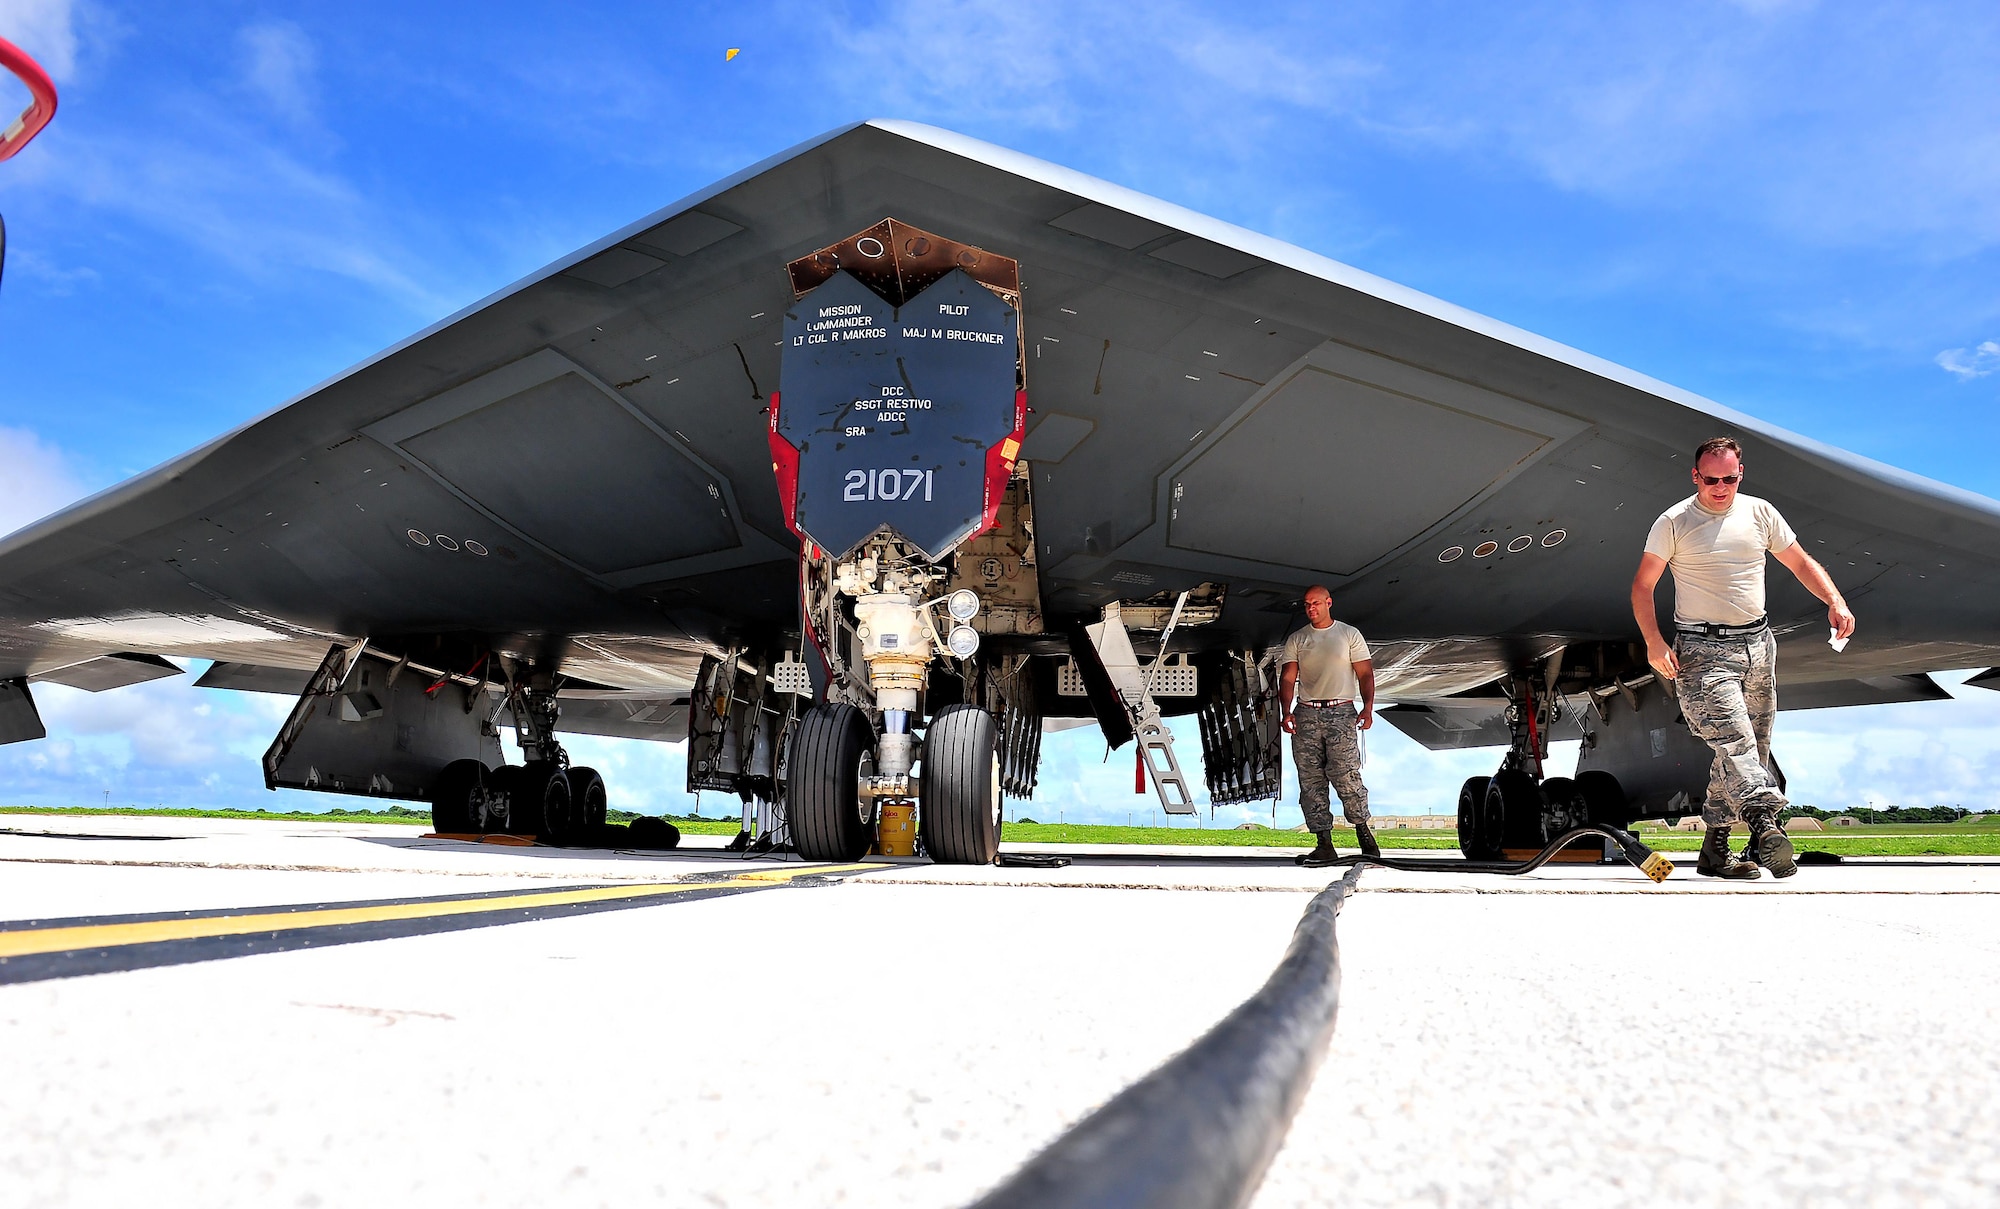 U.S. Air Force Senior Airman Julian Tobin (left), an aerospace repair technician assigned to the 509th Maintenance Squadron, and Tech. Sgt. Kory Stanton, a dedicated crew chief assigned to the 509th Aircraft Maintenance Squadron, finish pre-flight inspections Aug. 10, 2016 at Andersen Air Force Base, Guam. Bomber training missions ensure crews maintain a high state of readiness and proficiency in demonstrating their ability to provide an always-ready global strike capability. (U.S. Air Force photo by Senior Airman Jovan Banks)